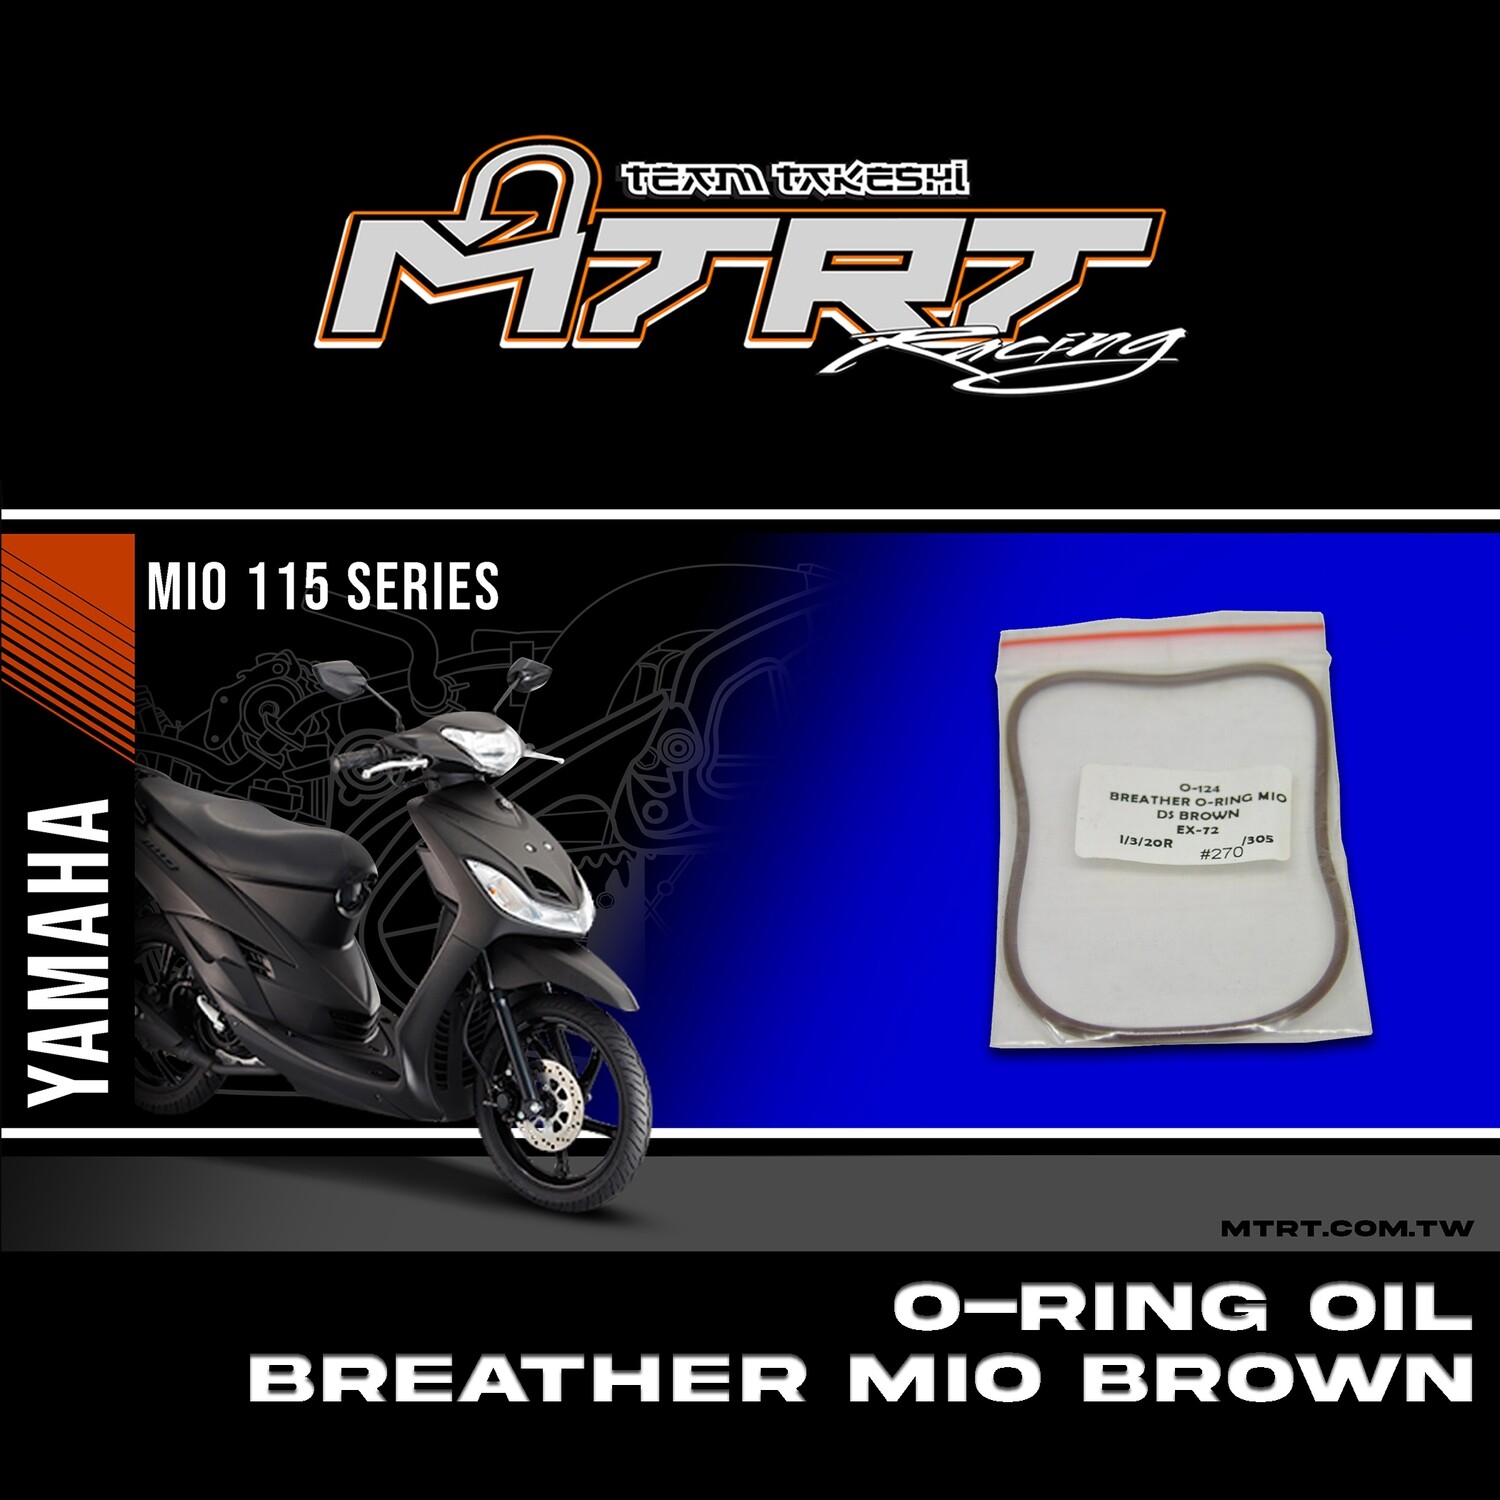 O-RING OIL BREATHER